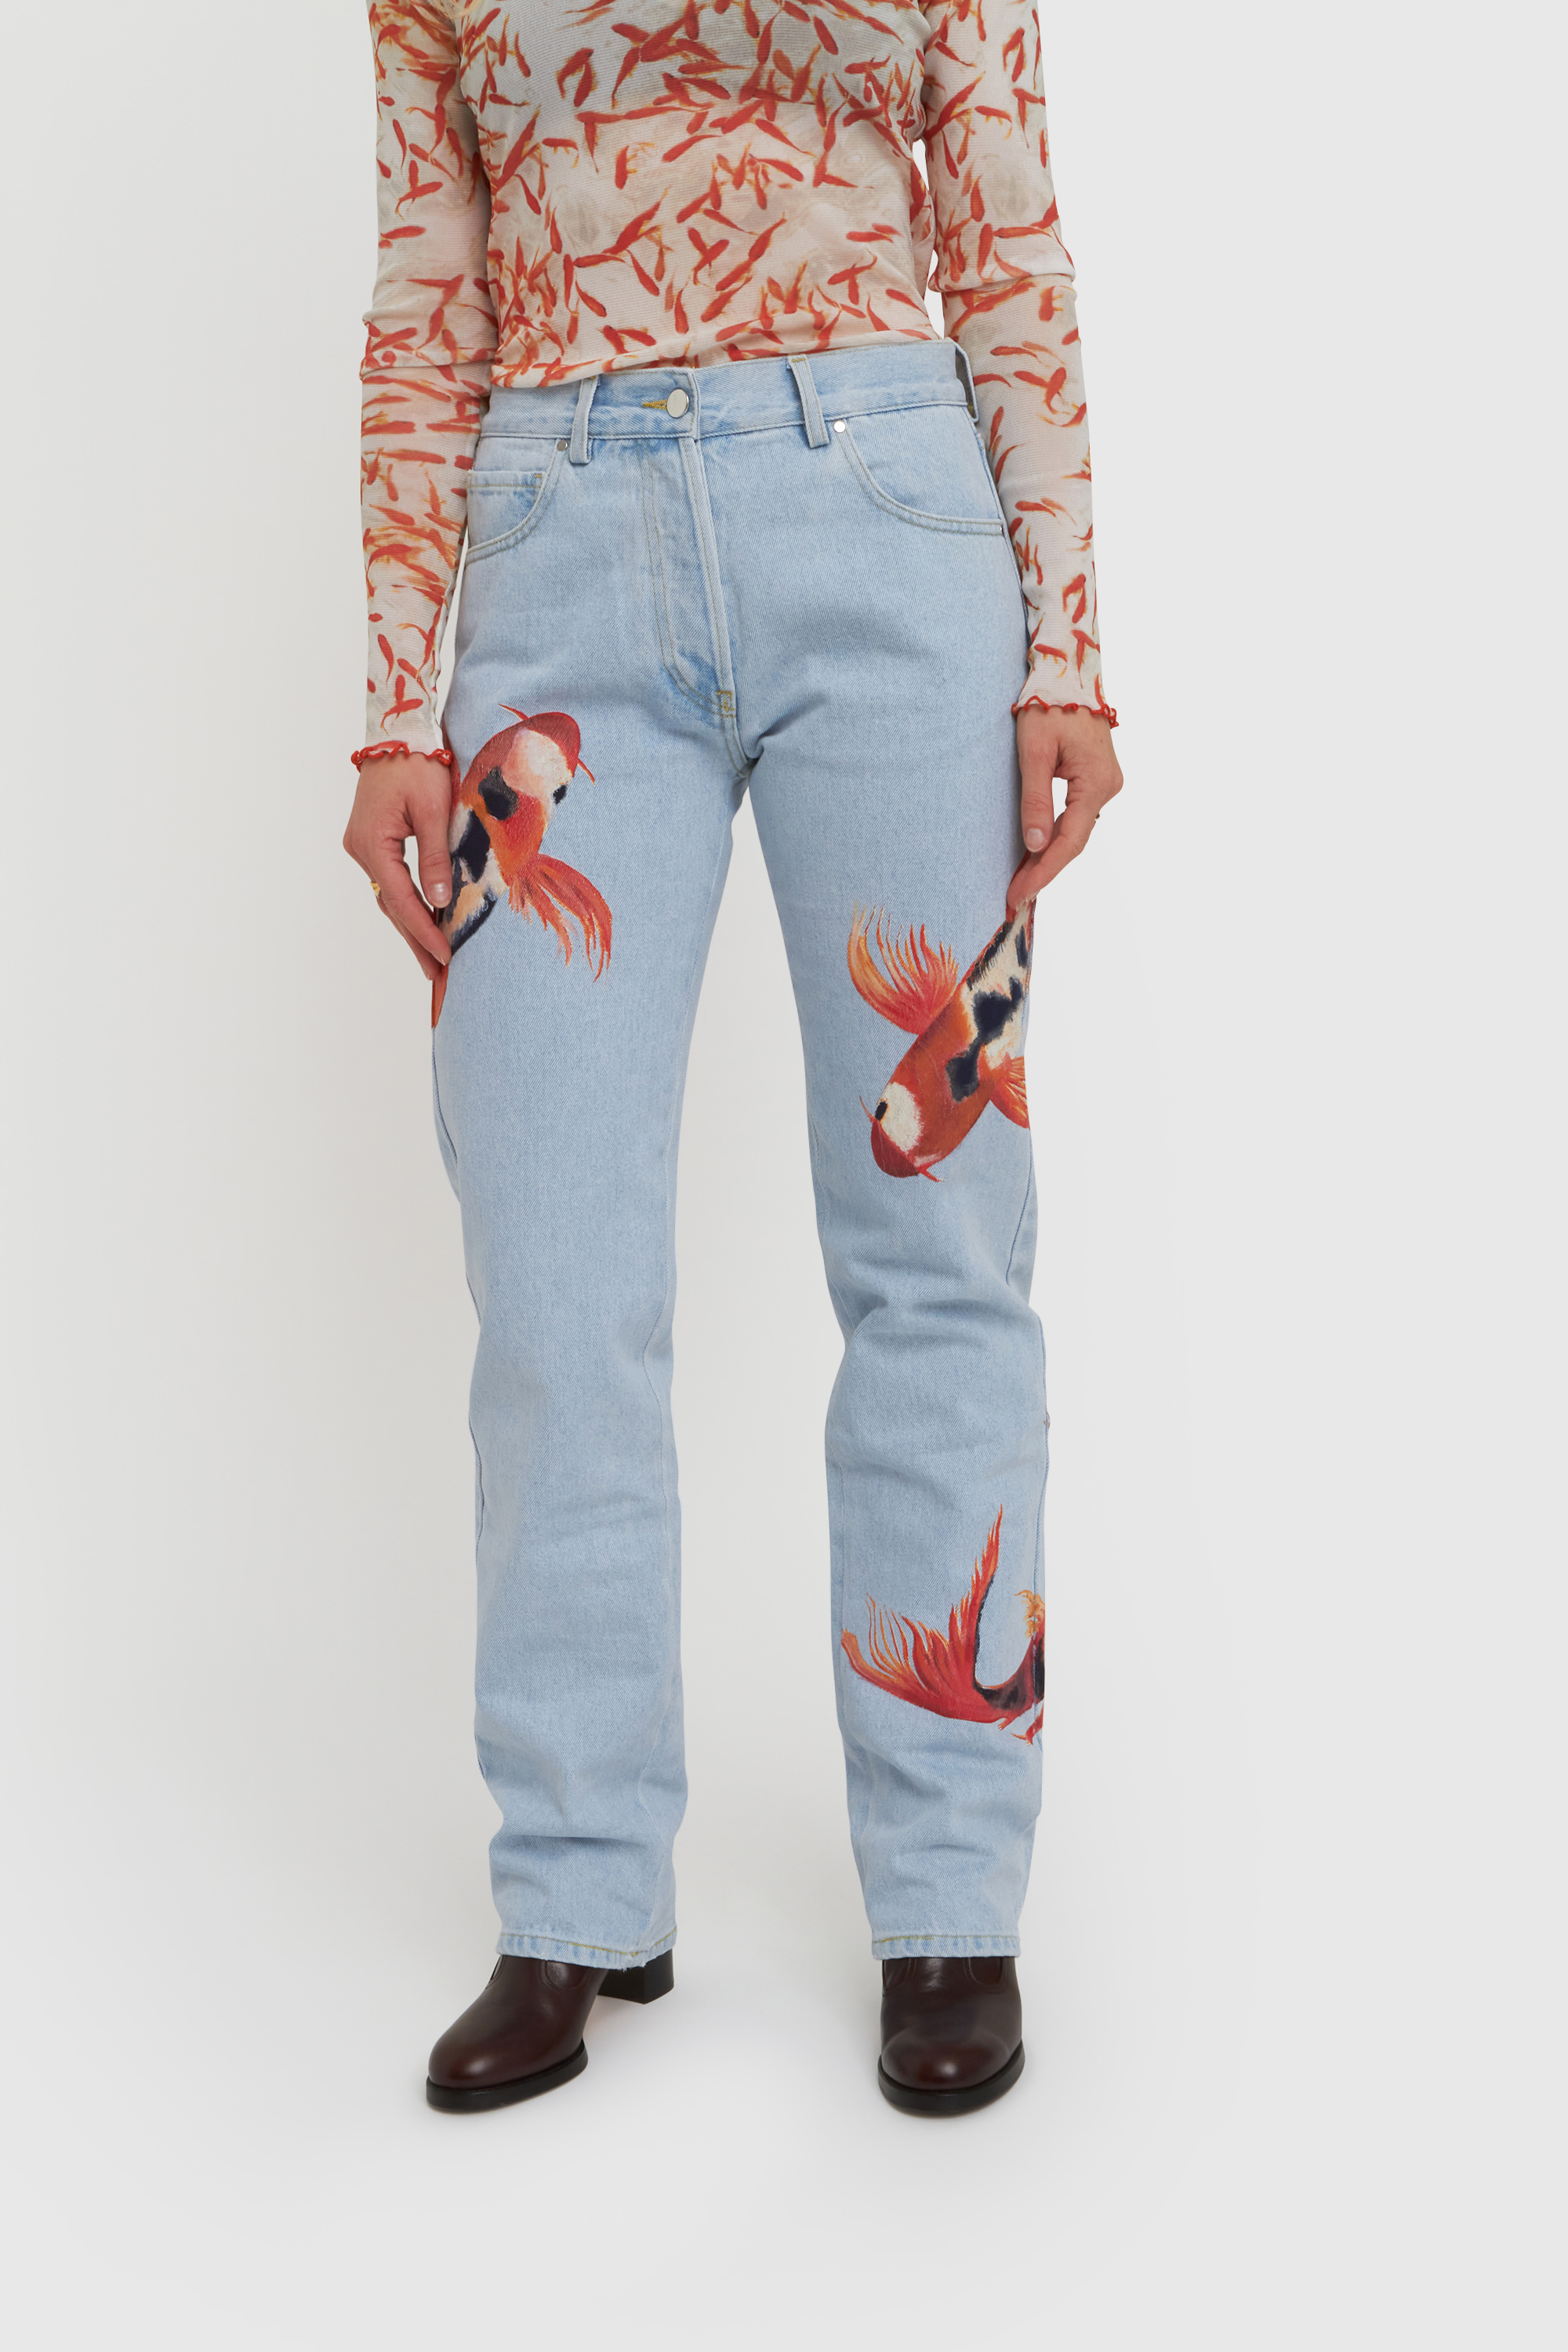 Hand Painted Jeans, Patched Denim